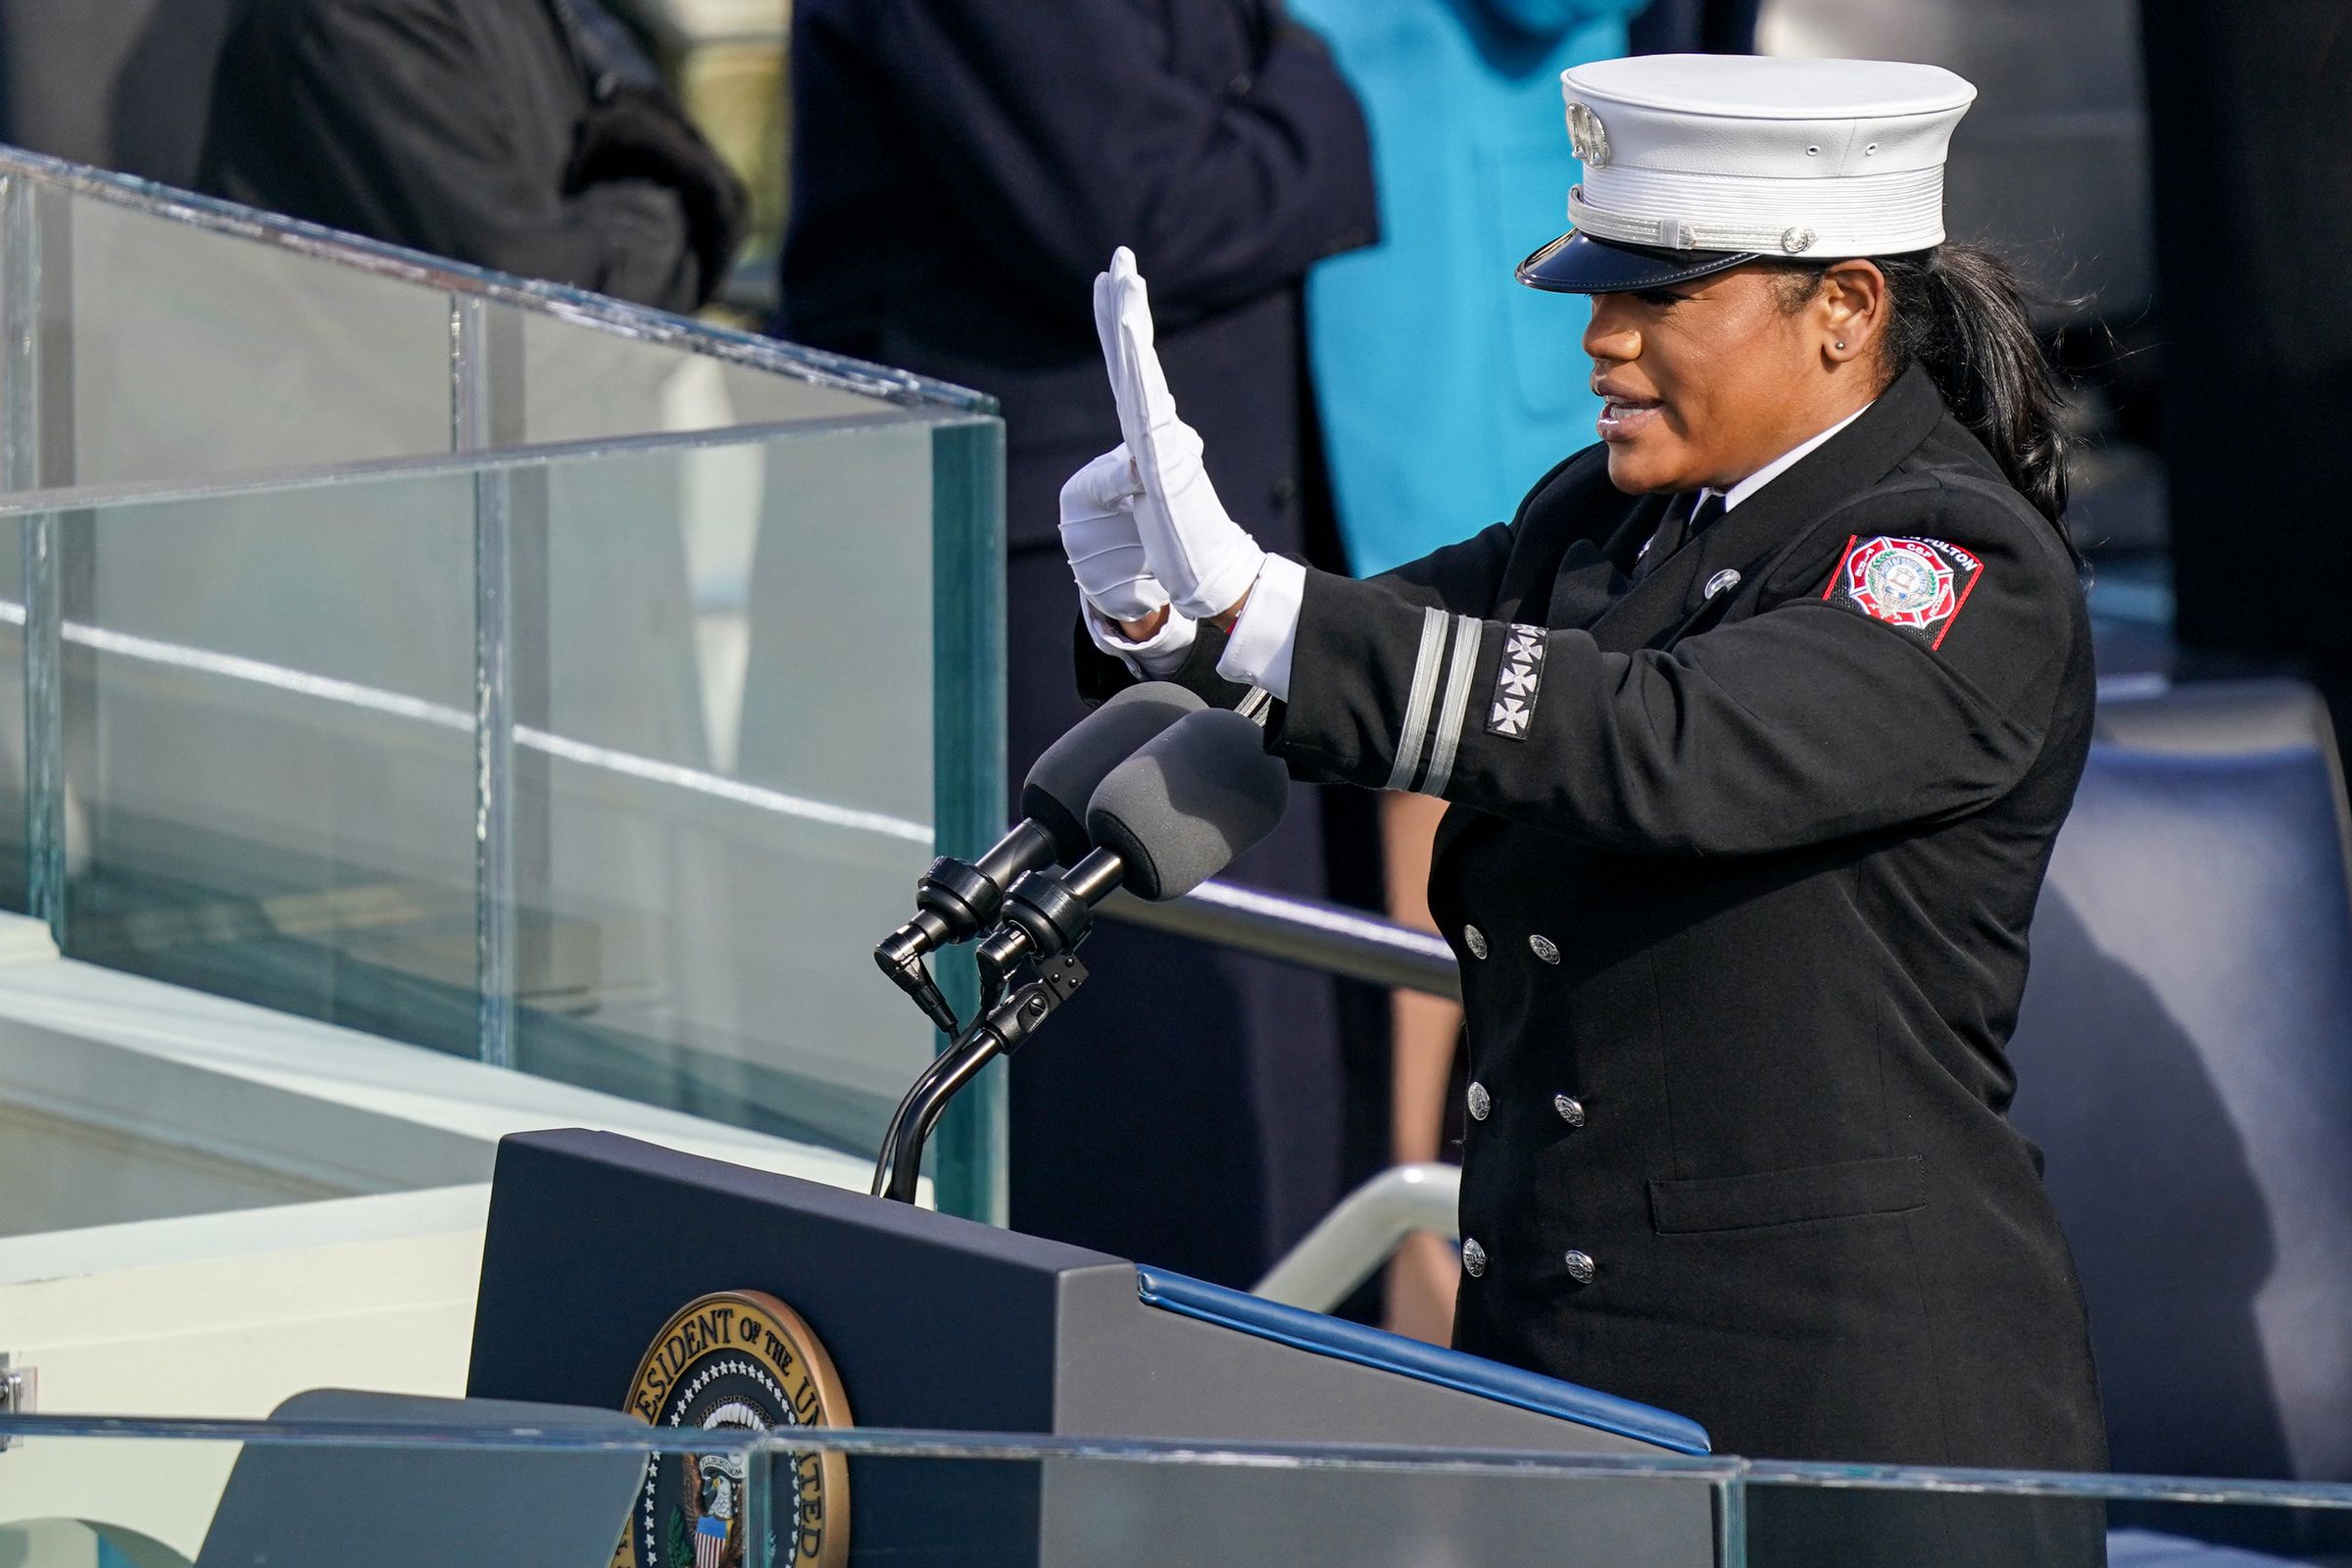 A Black woman in uniform stands at a podium, holding up her hands in the middle of signing.